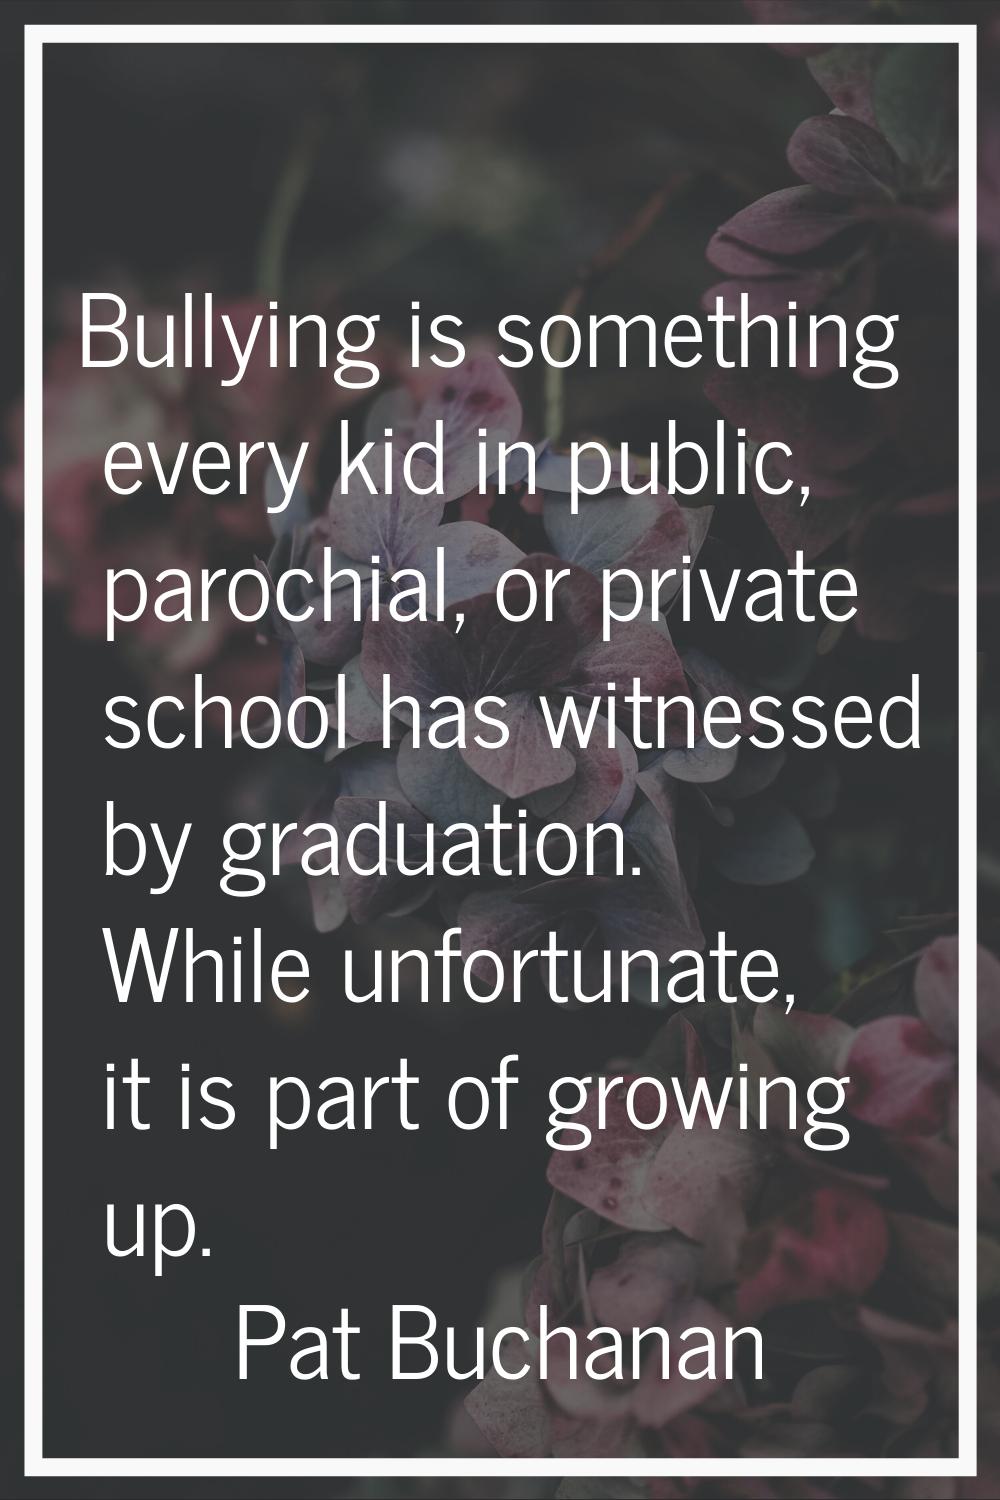 Bullying is something every kid in public, parochial, or private school has witnessed by graduation